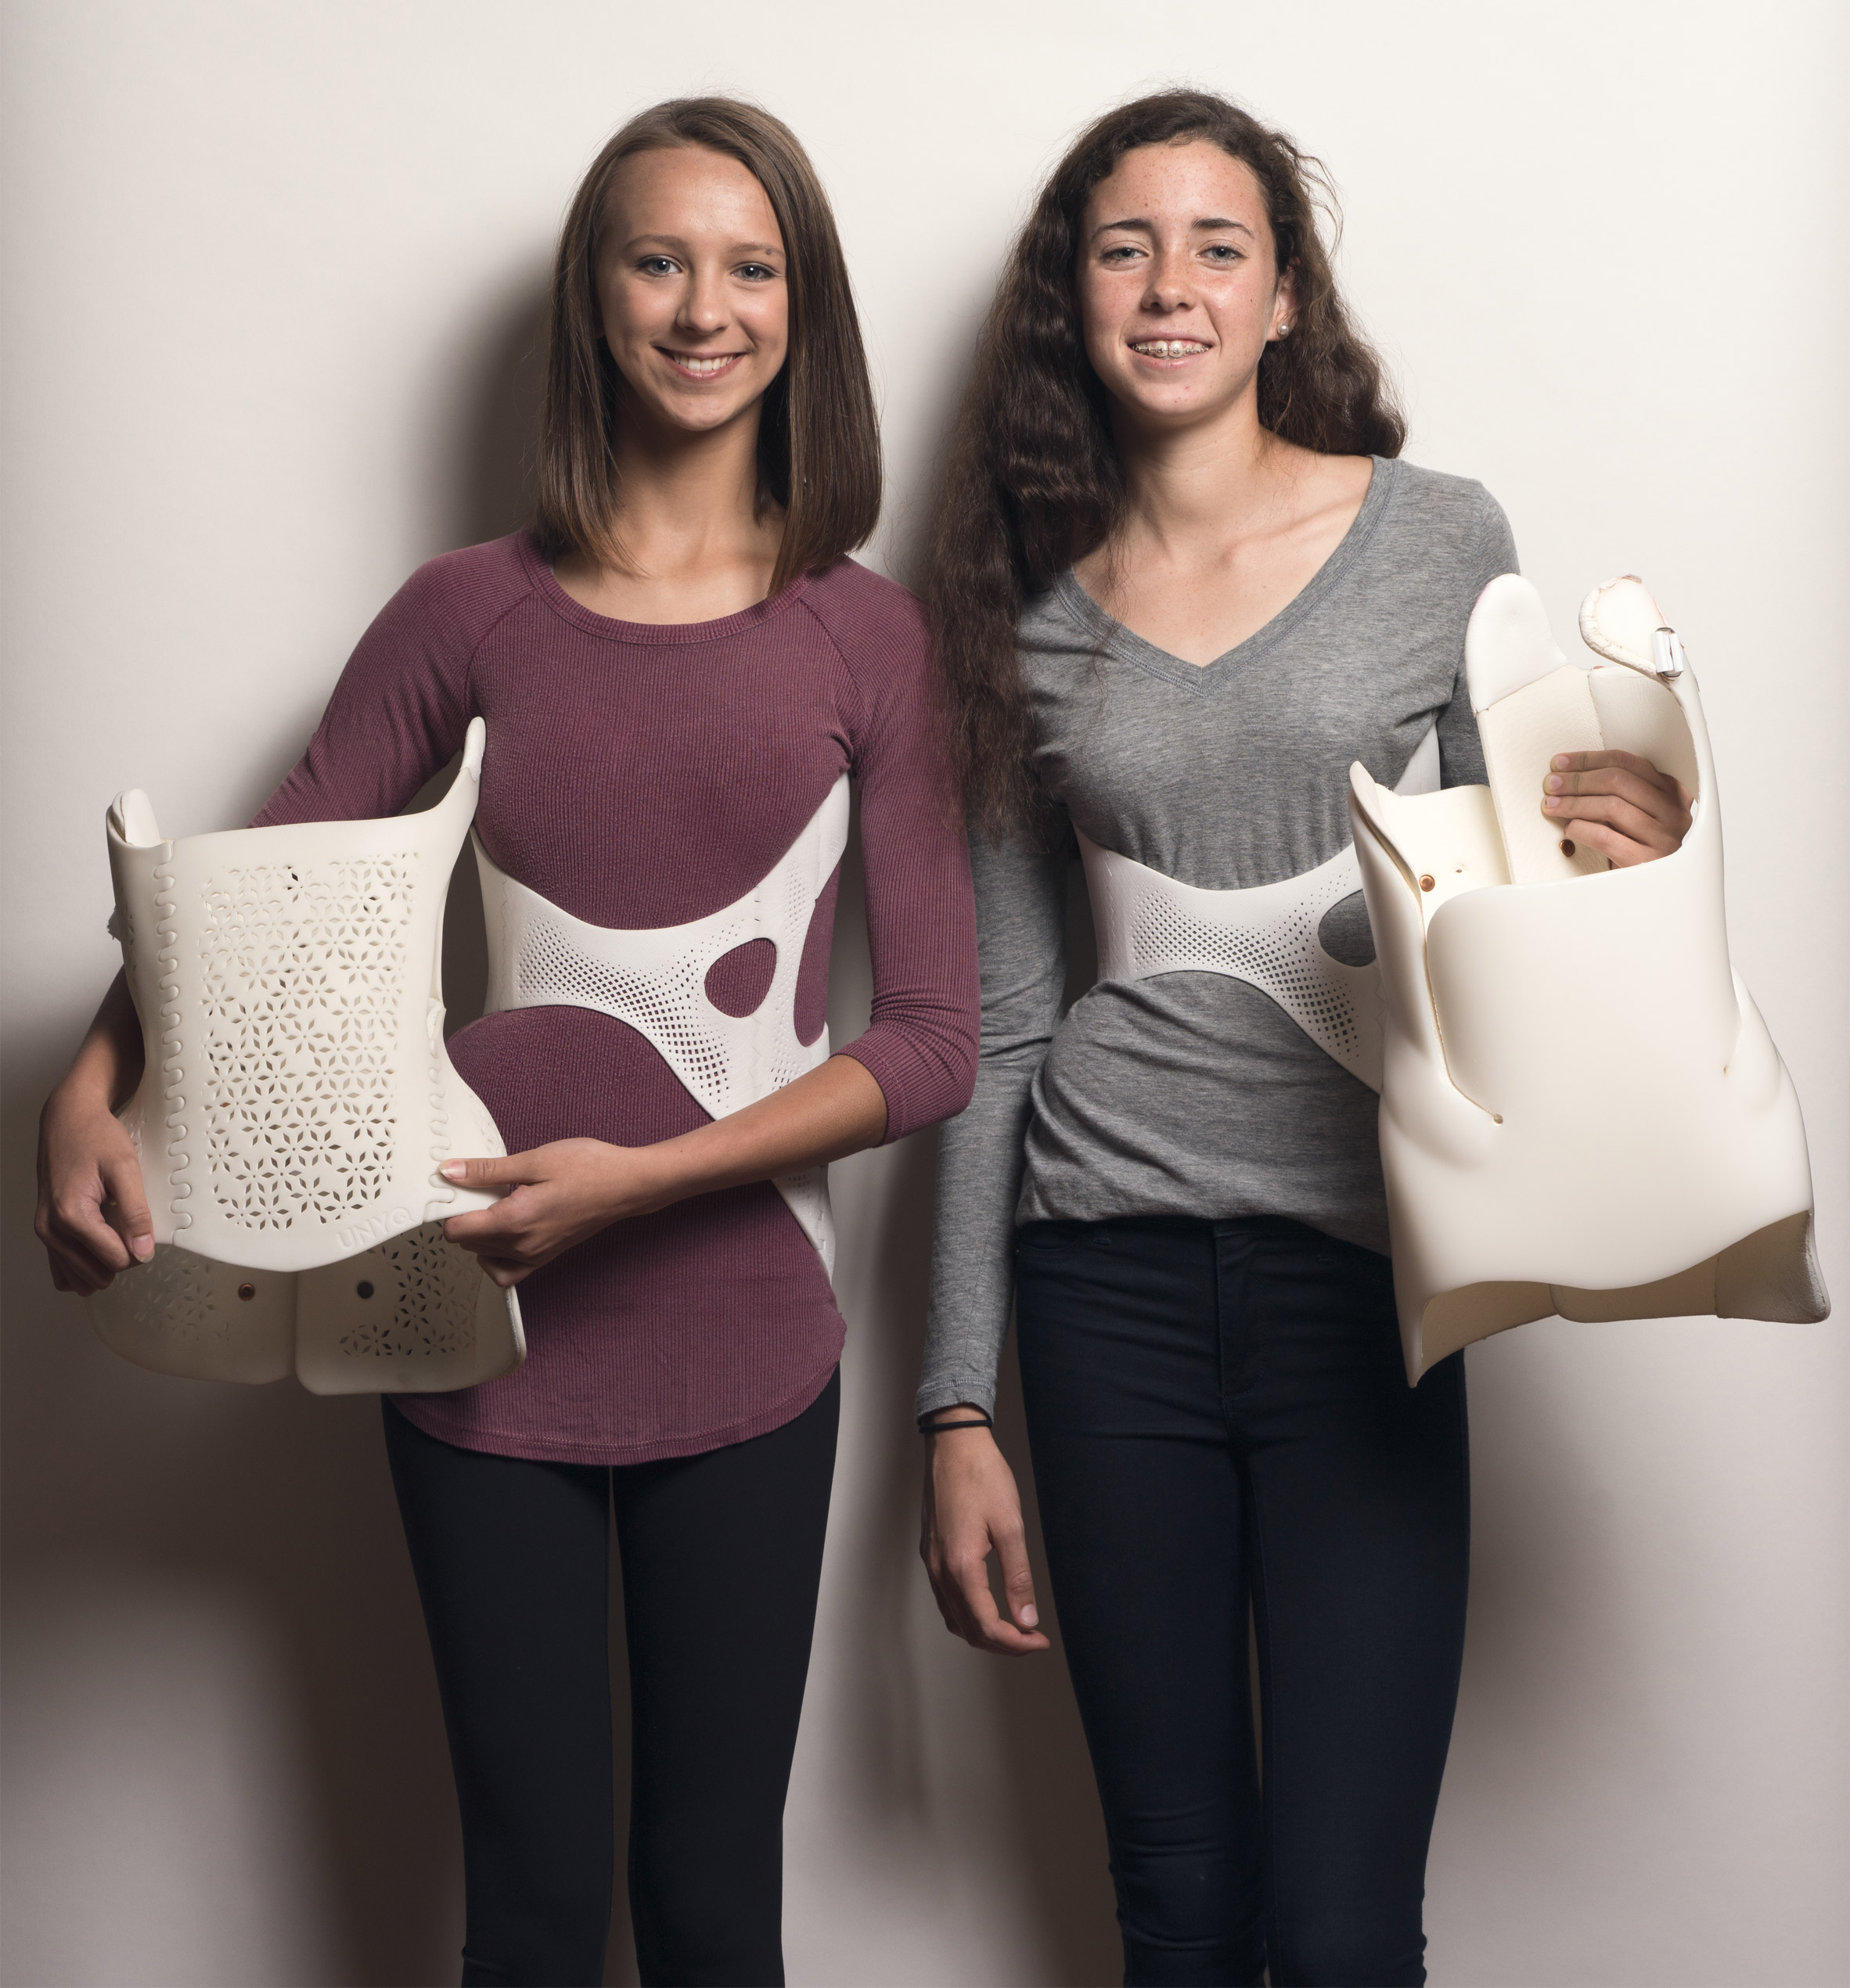 3D-printed back brace offers "fashionable" solution for scoliosis sufferers